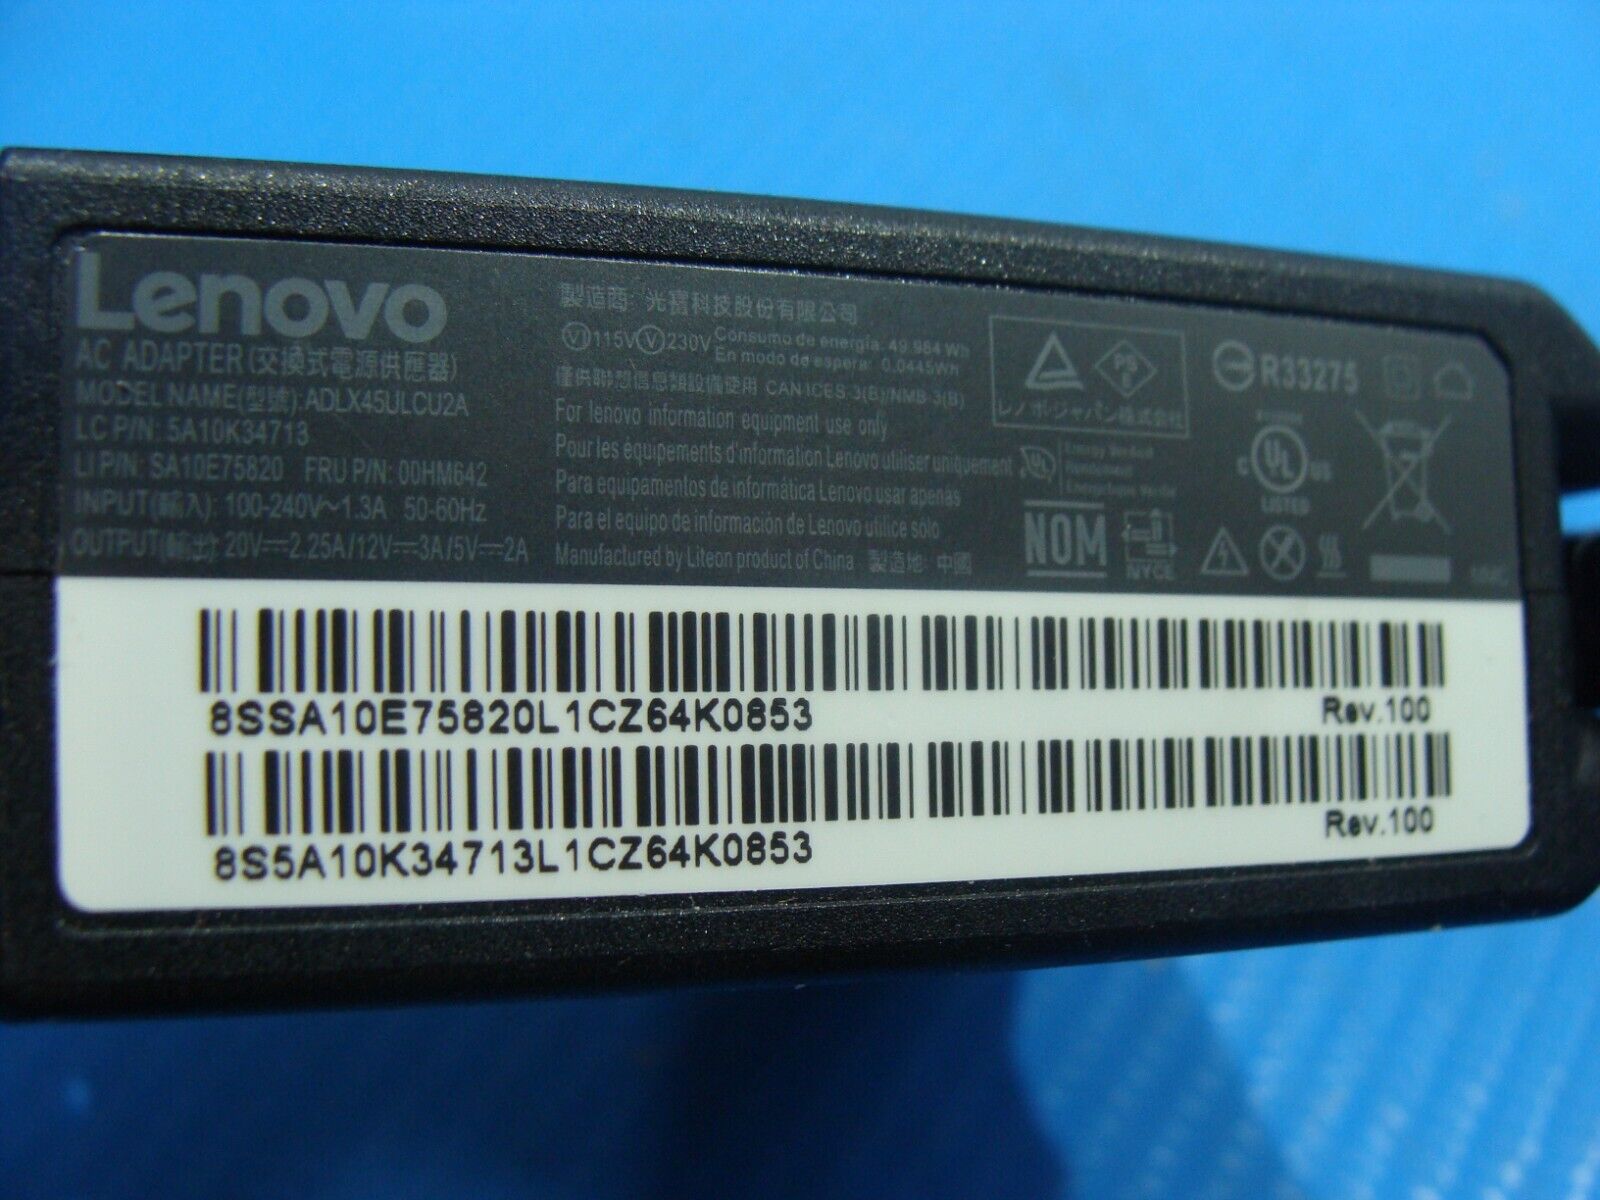 Genuine Charger for Lenovo Yoga 910 910-13 910-13IKB Power Supply Adapter Cord